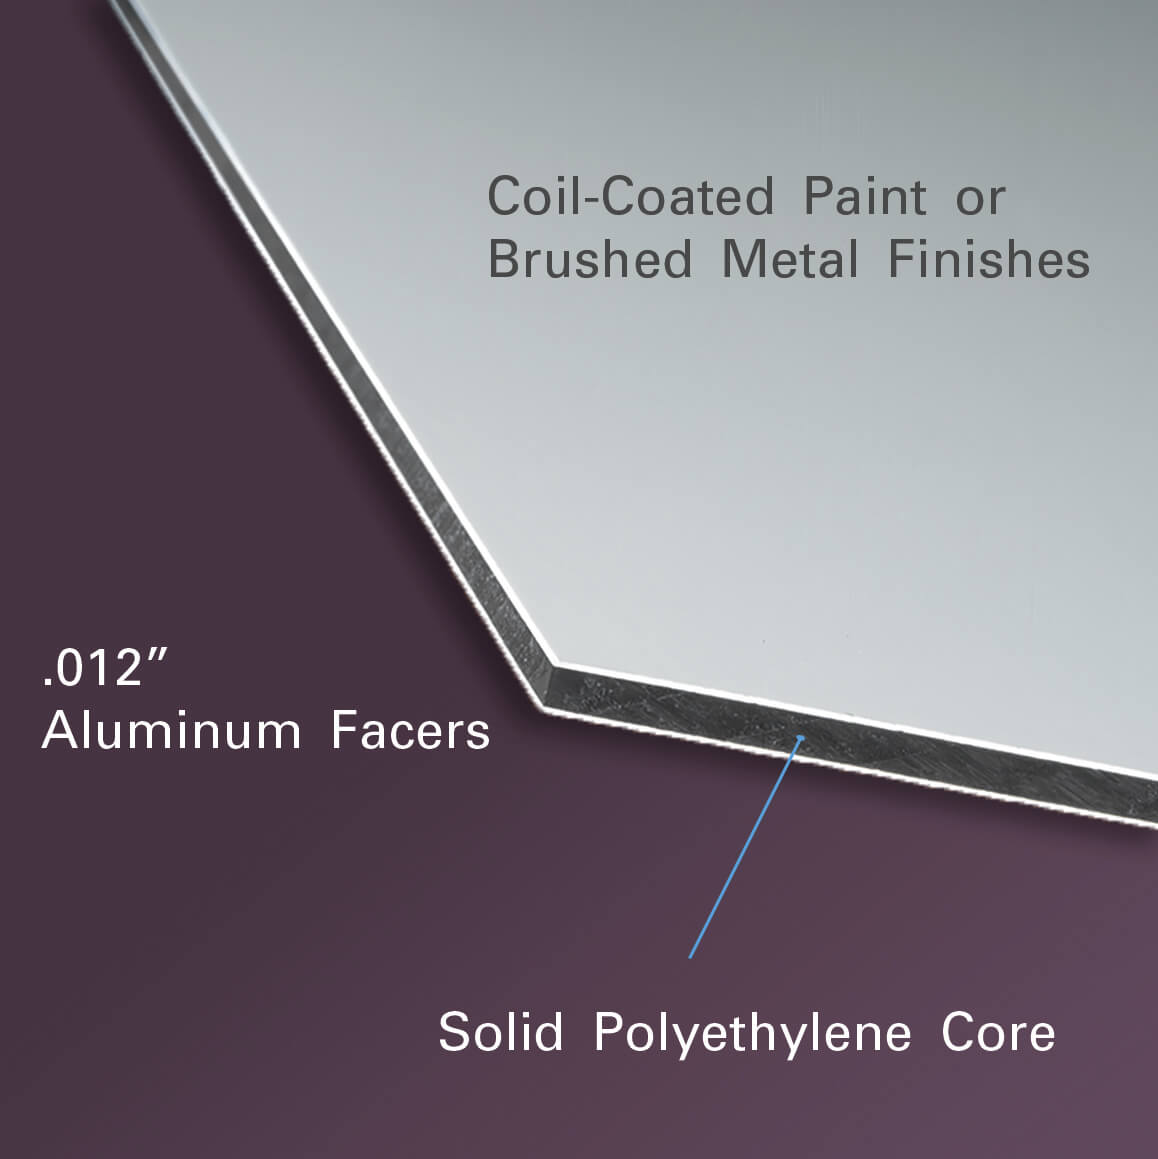 corner angle view showing the coil-coated paint or brushed metal finishes, solid polyethylene core, with the .012